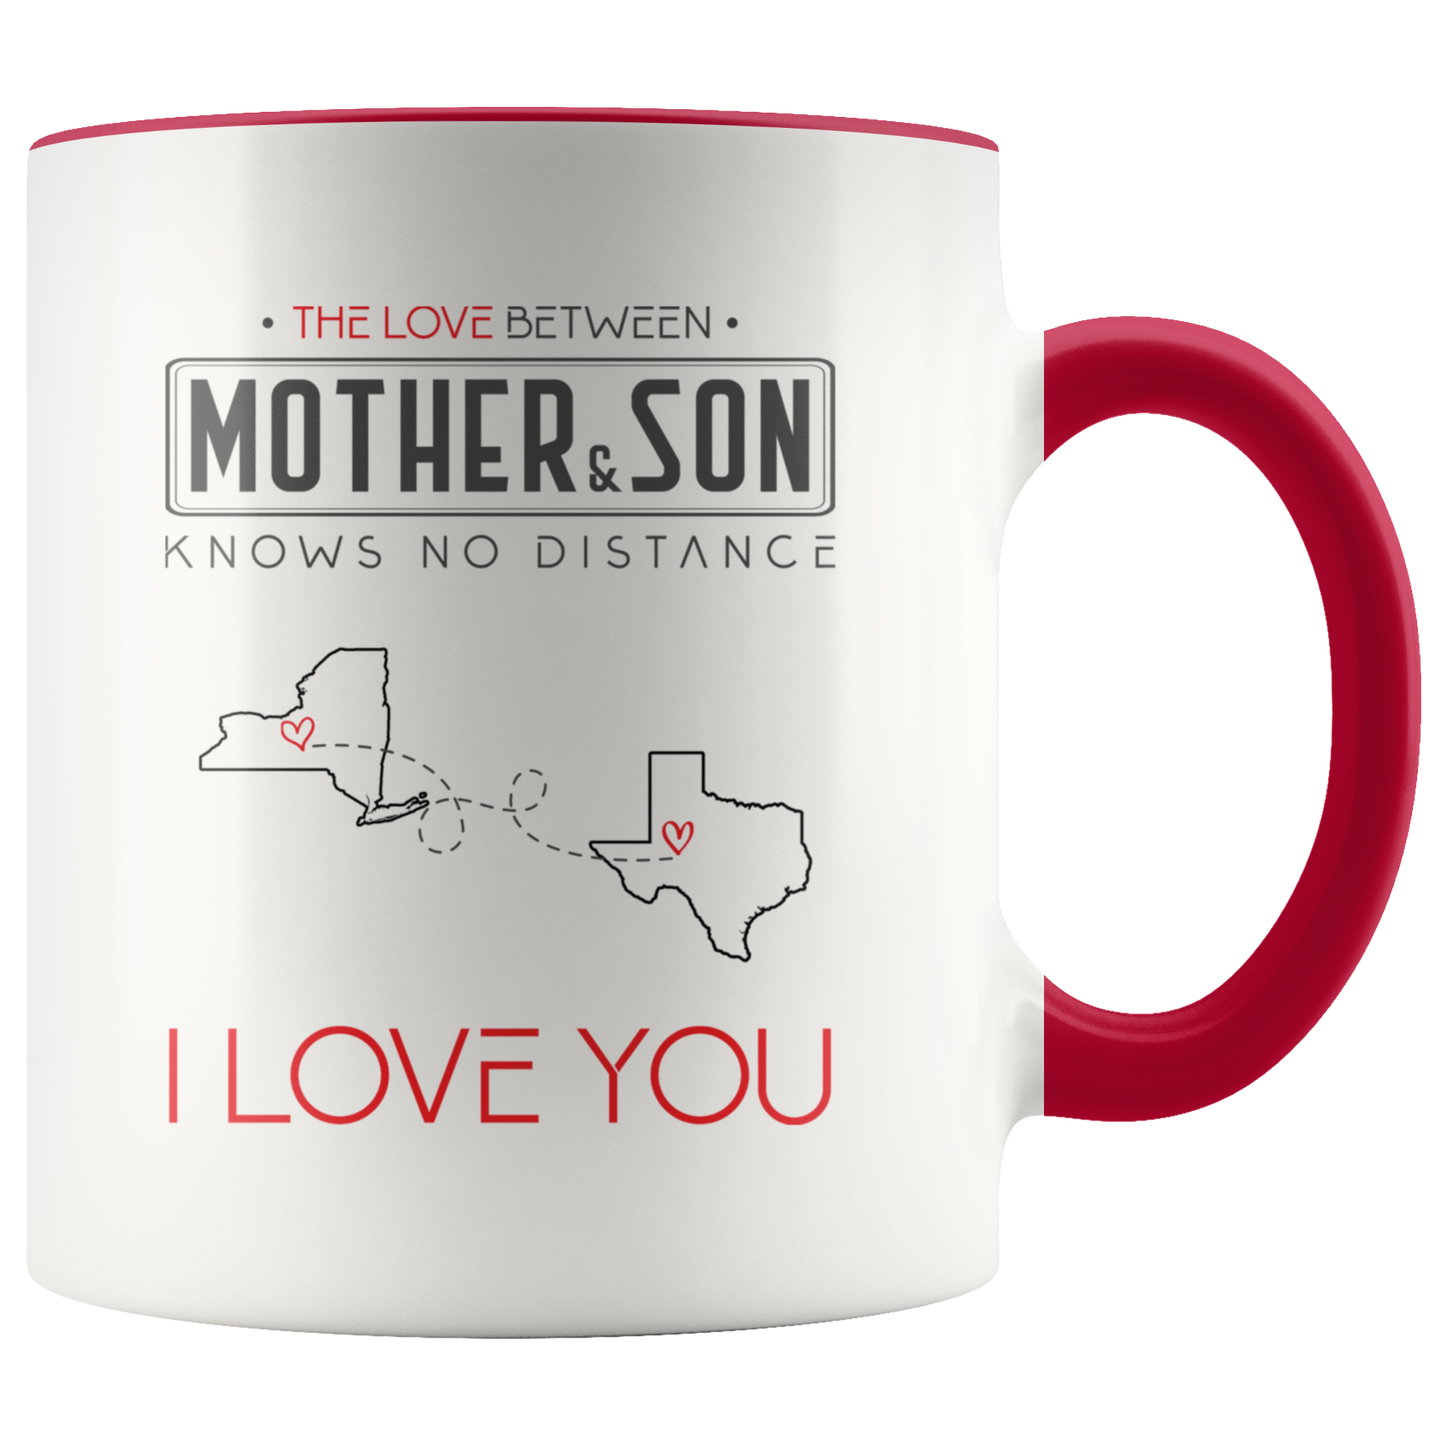 ND-21315233-sp-23550 - [ New York | Texas ]Mom And Son Accent Mug 11 oz Red - The Love Between Mother A